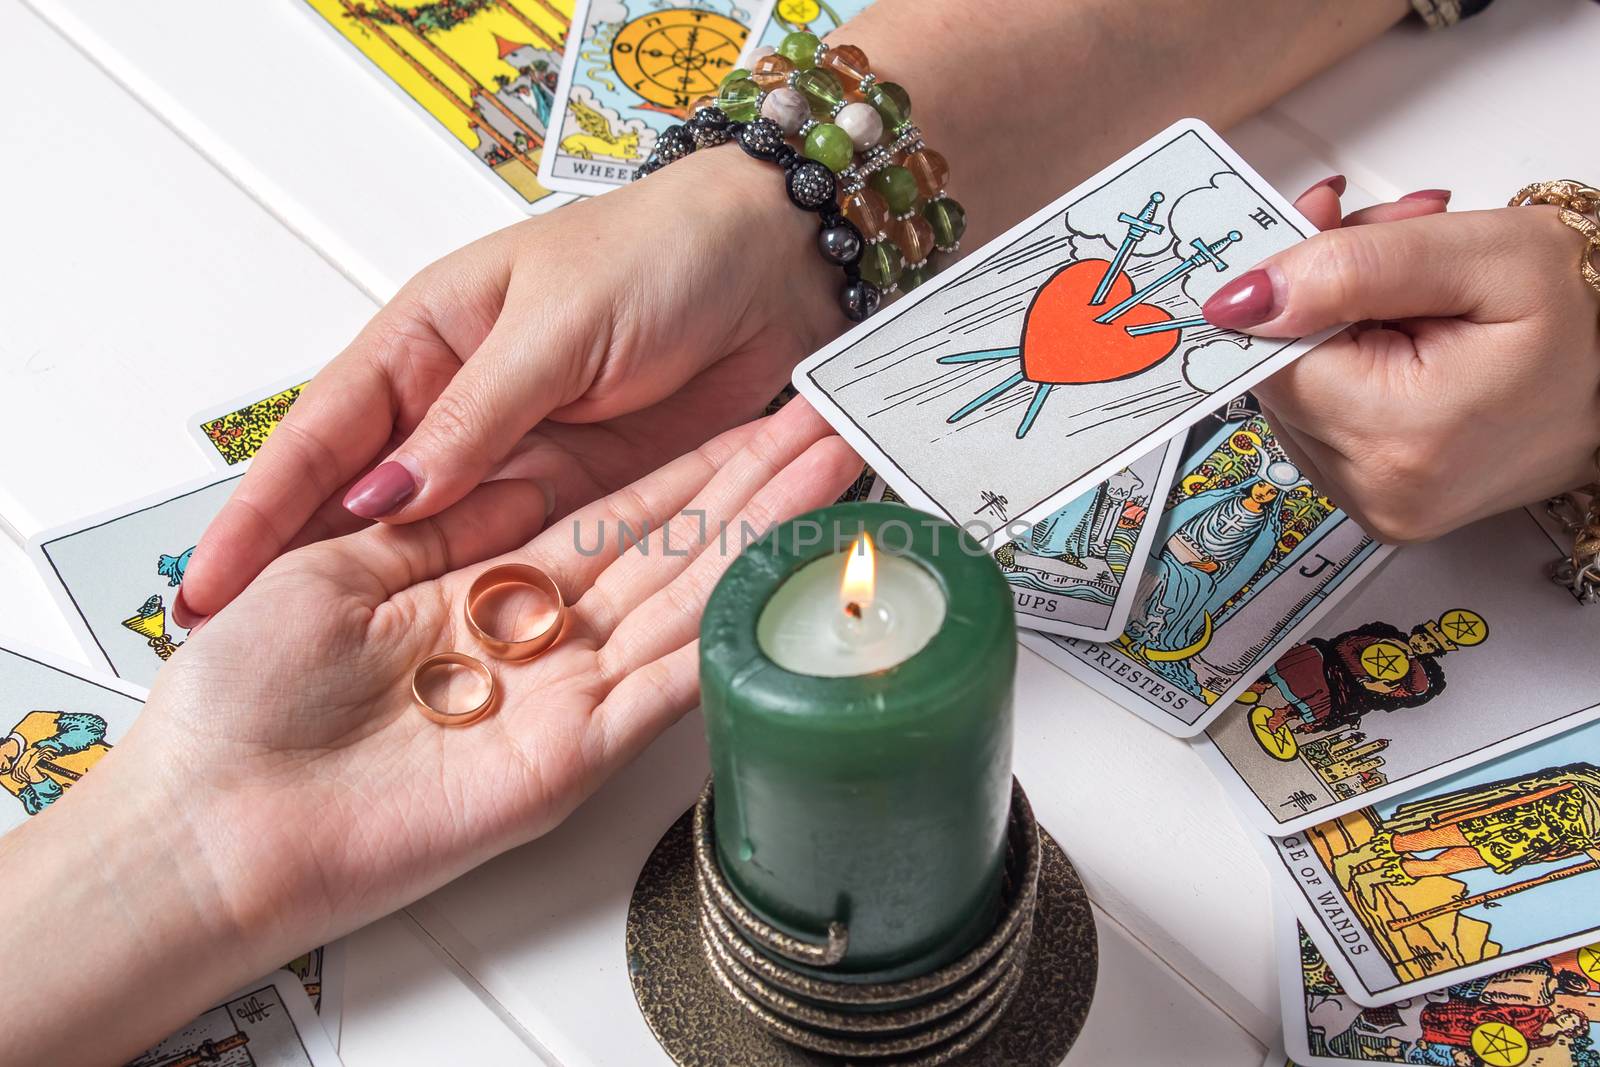 Bangkok,Thailand,March.15.20.Christmas fortune telling and fortune telling.A Gypsy woman guesses a love match using wedding rings and fortune-telling cards by candlelight.Spiritism and magic sessions